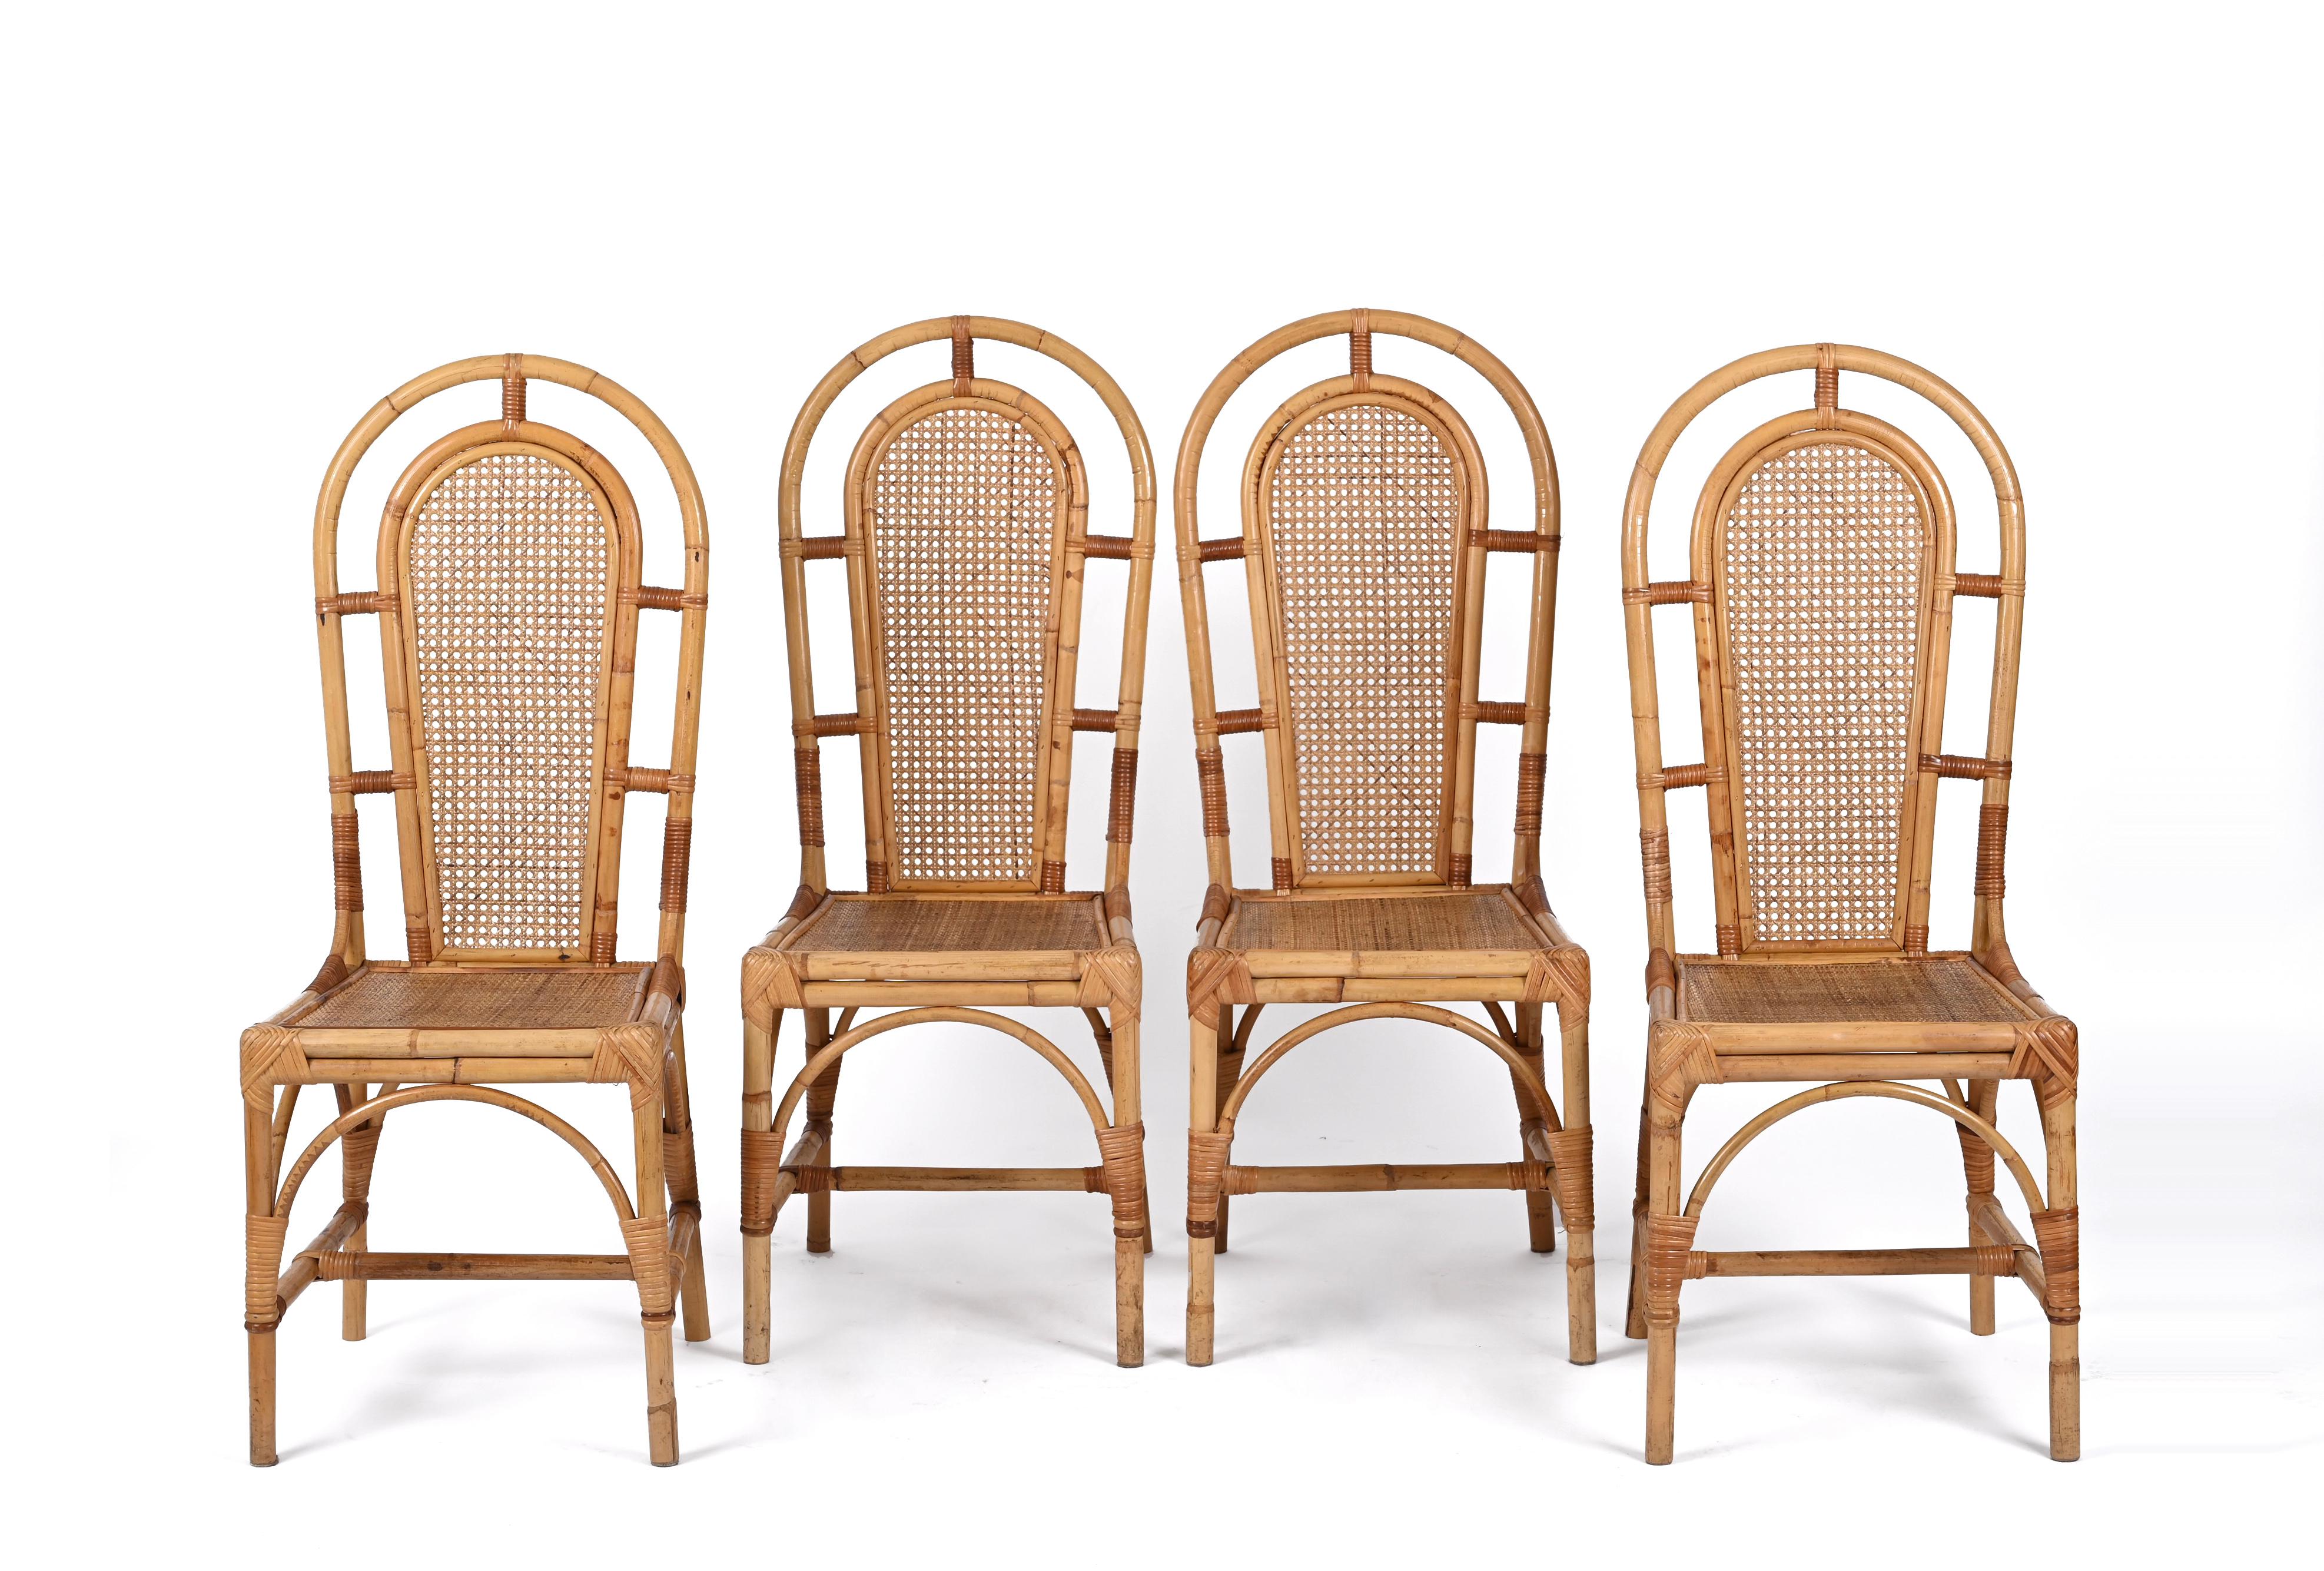 Sef of Four Bamboo and Vienna Straw Chairs, Vivai Del Sud, Italy 1970s For Sale 9